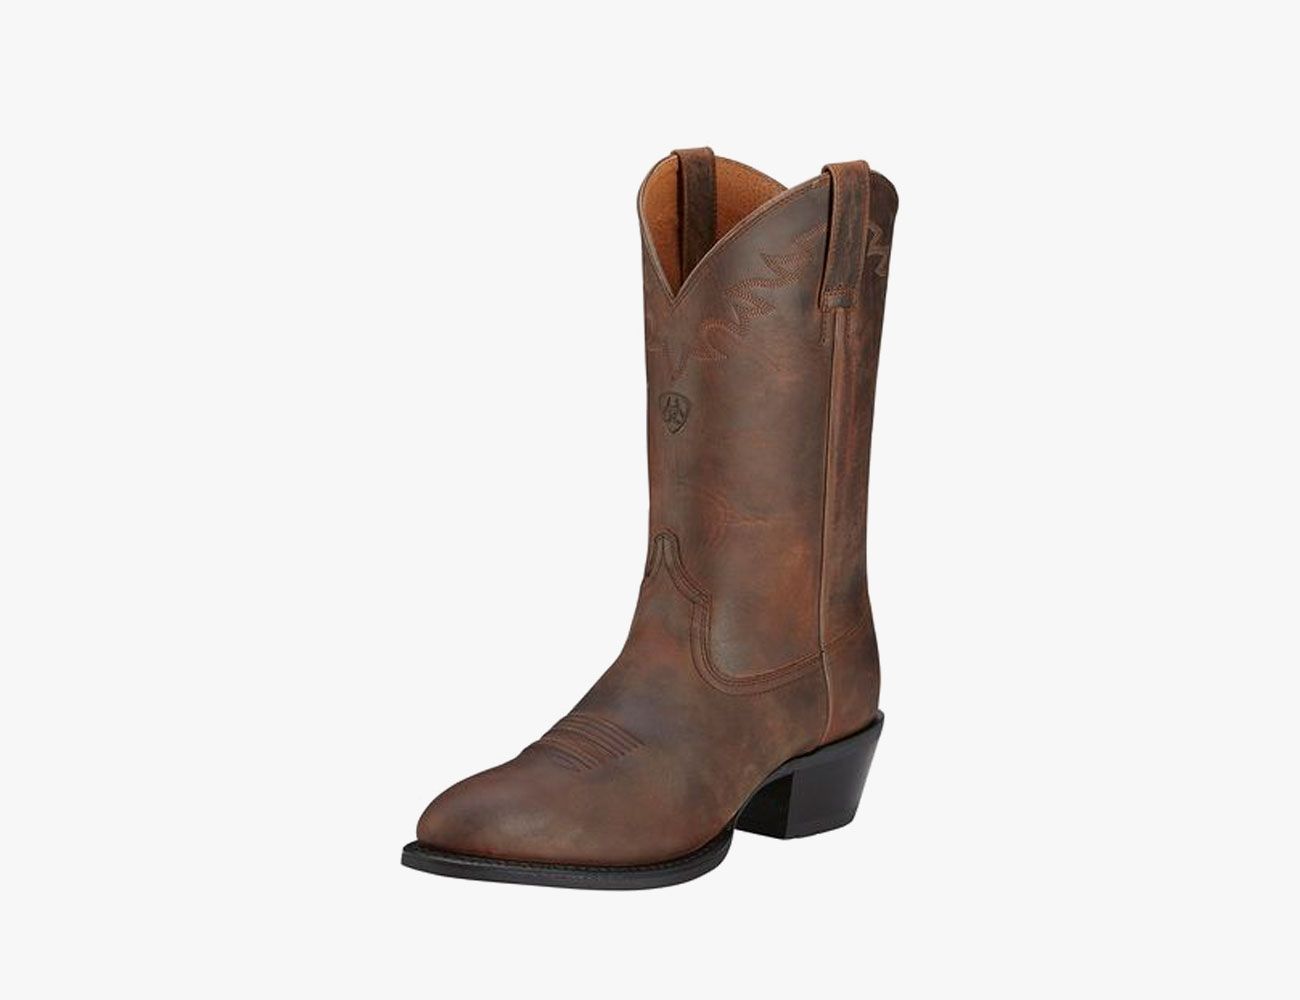 The Best Western Boots for Men